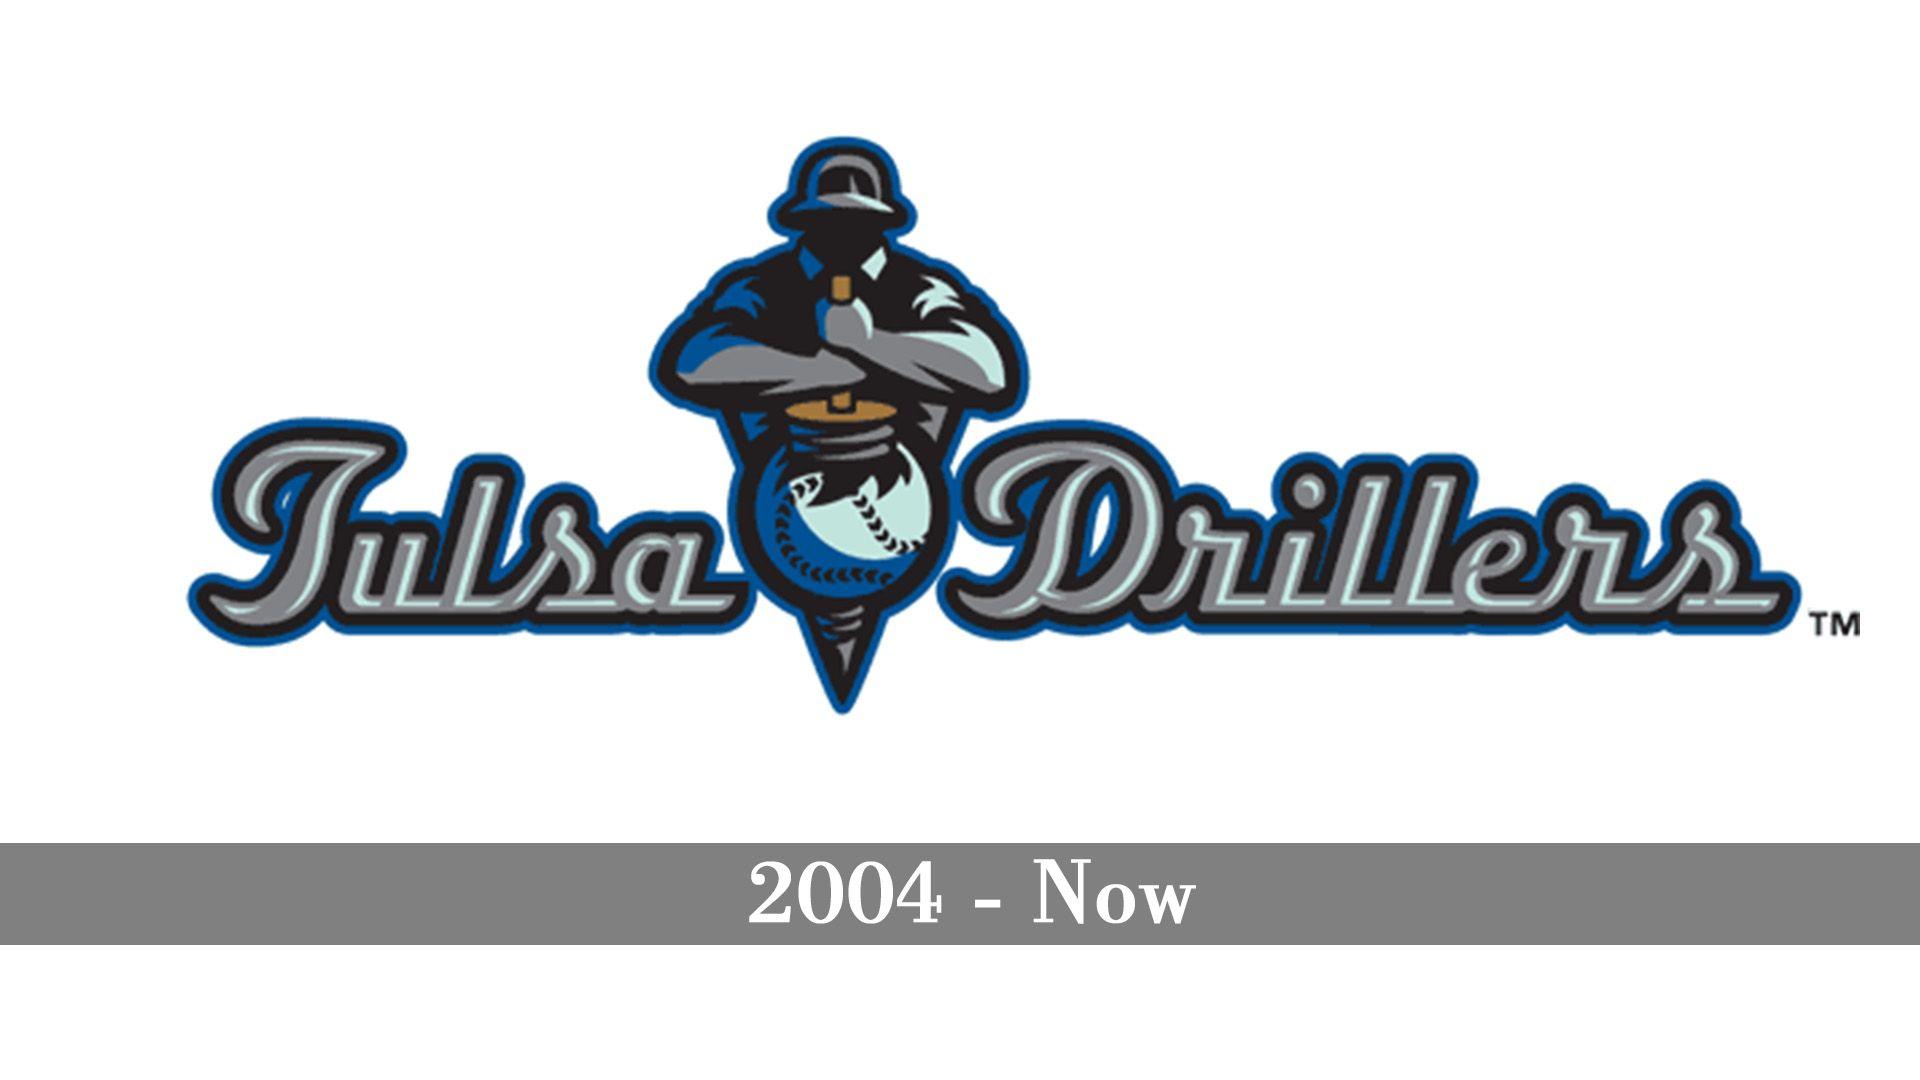 Drillers Logo - Tulsa Drillers logo, Tulsa Drillers Symbol, Meaning, History